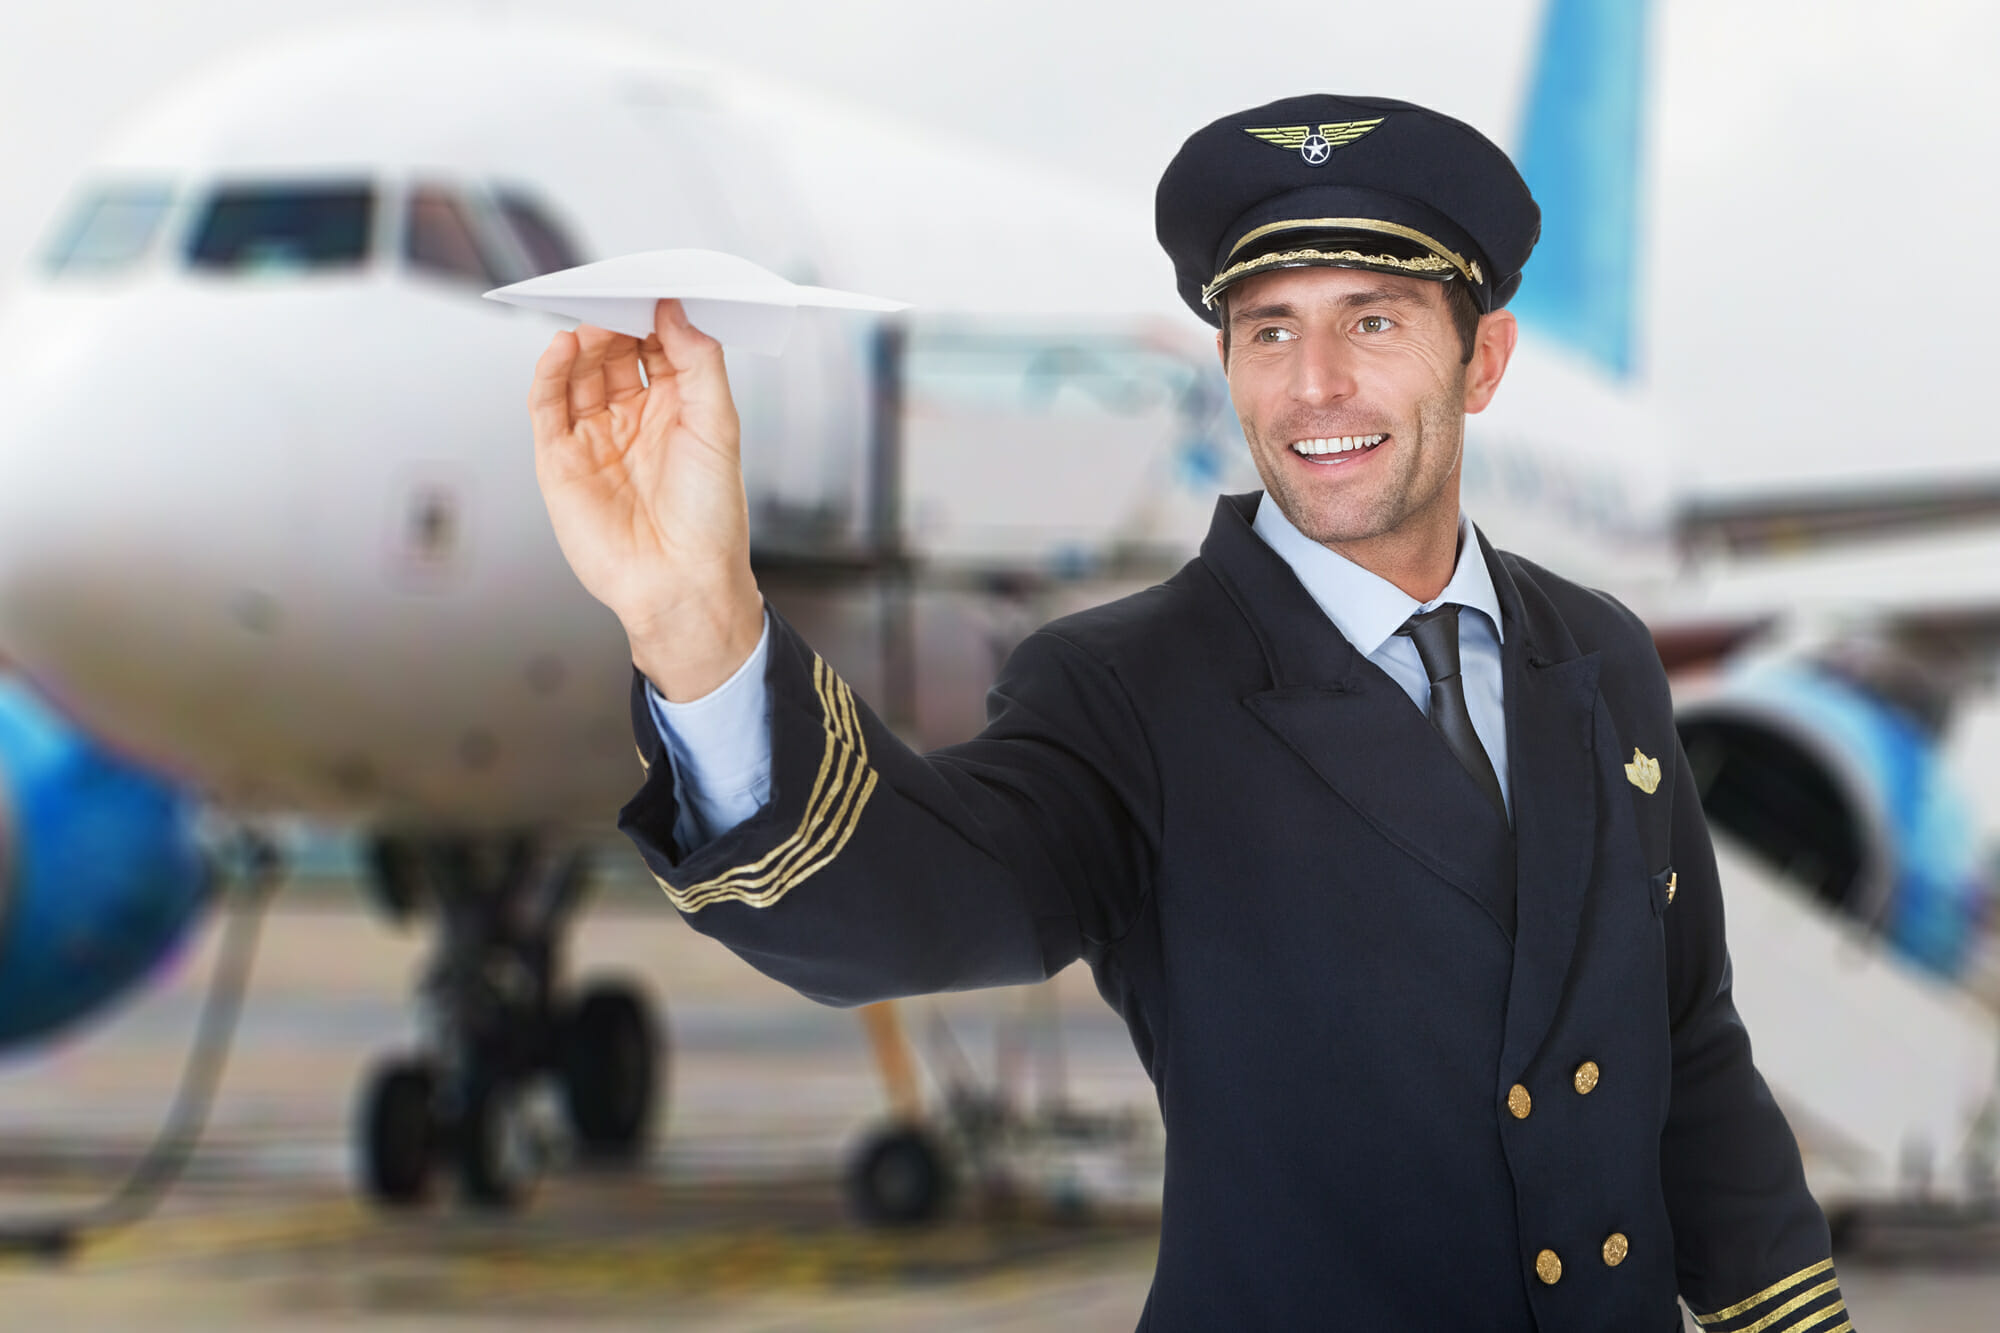 How To Be A Airline Pilot - Societynotice10